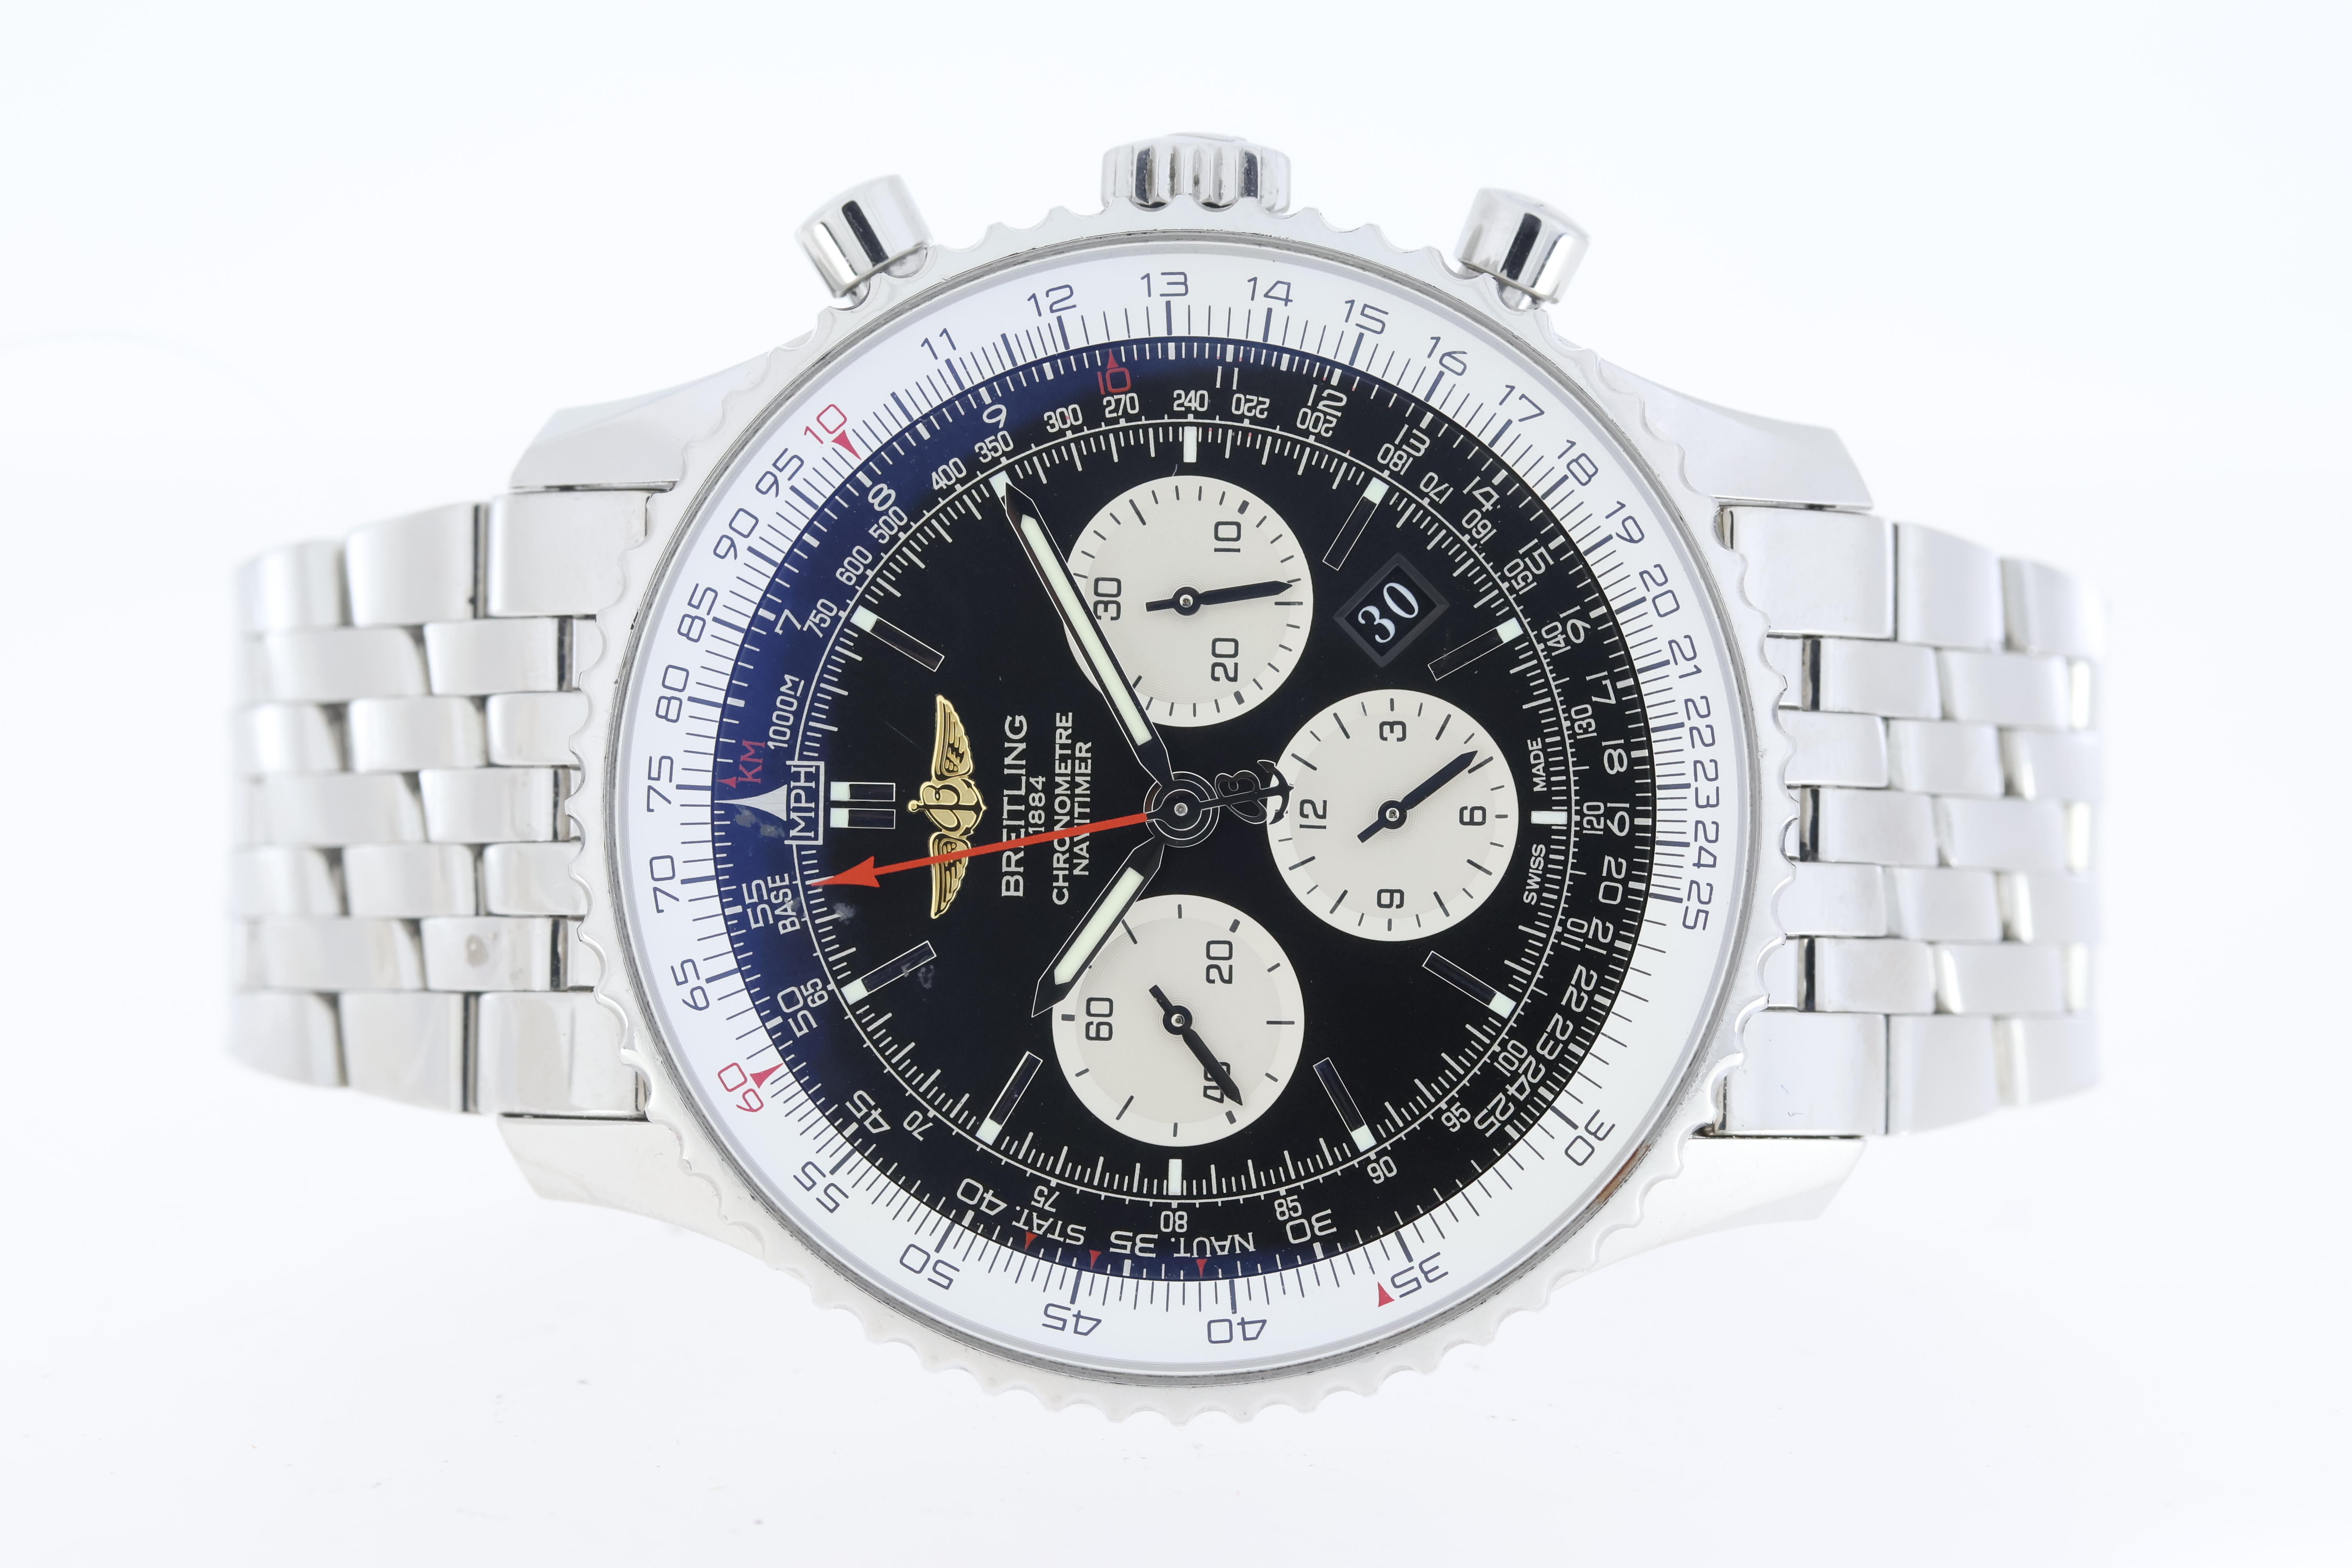 Breitling Navitimer Chronograph Automatic with Box - Image 2 of 6